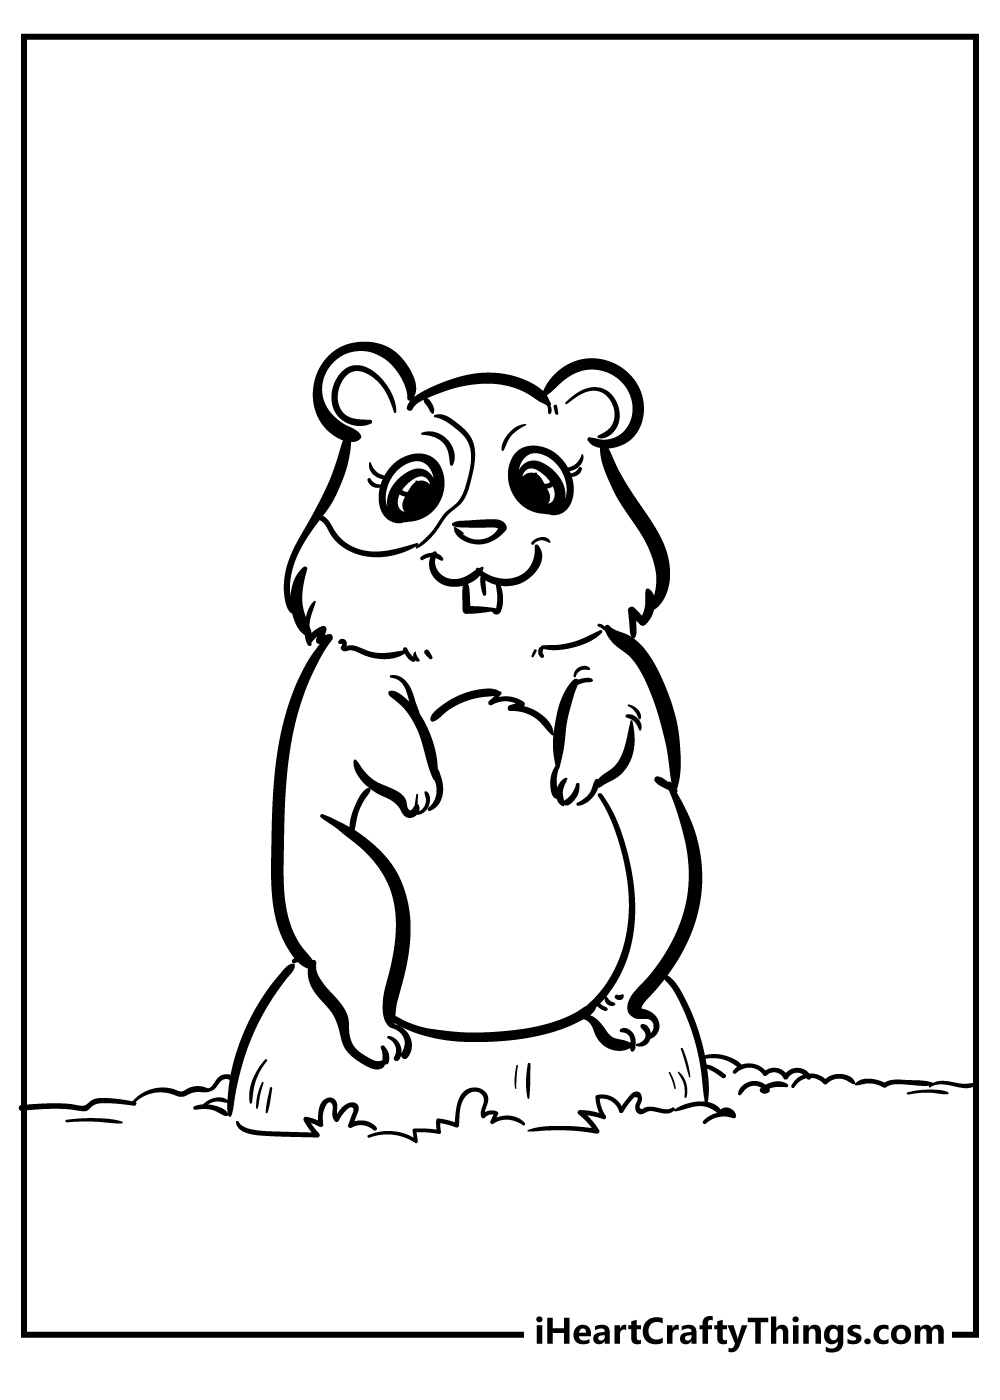 Hamster Coloring Pages for preschoolers free printable